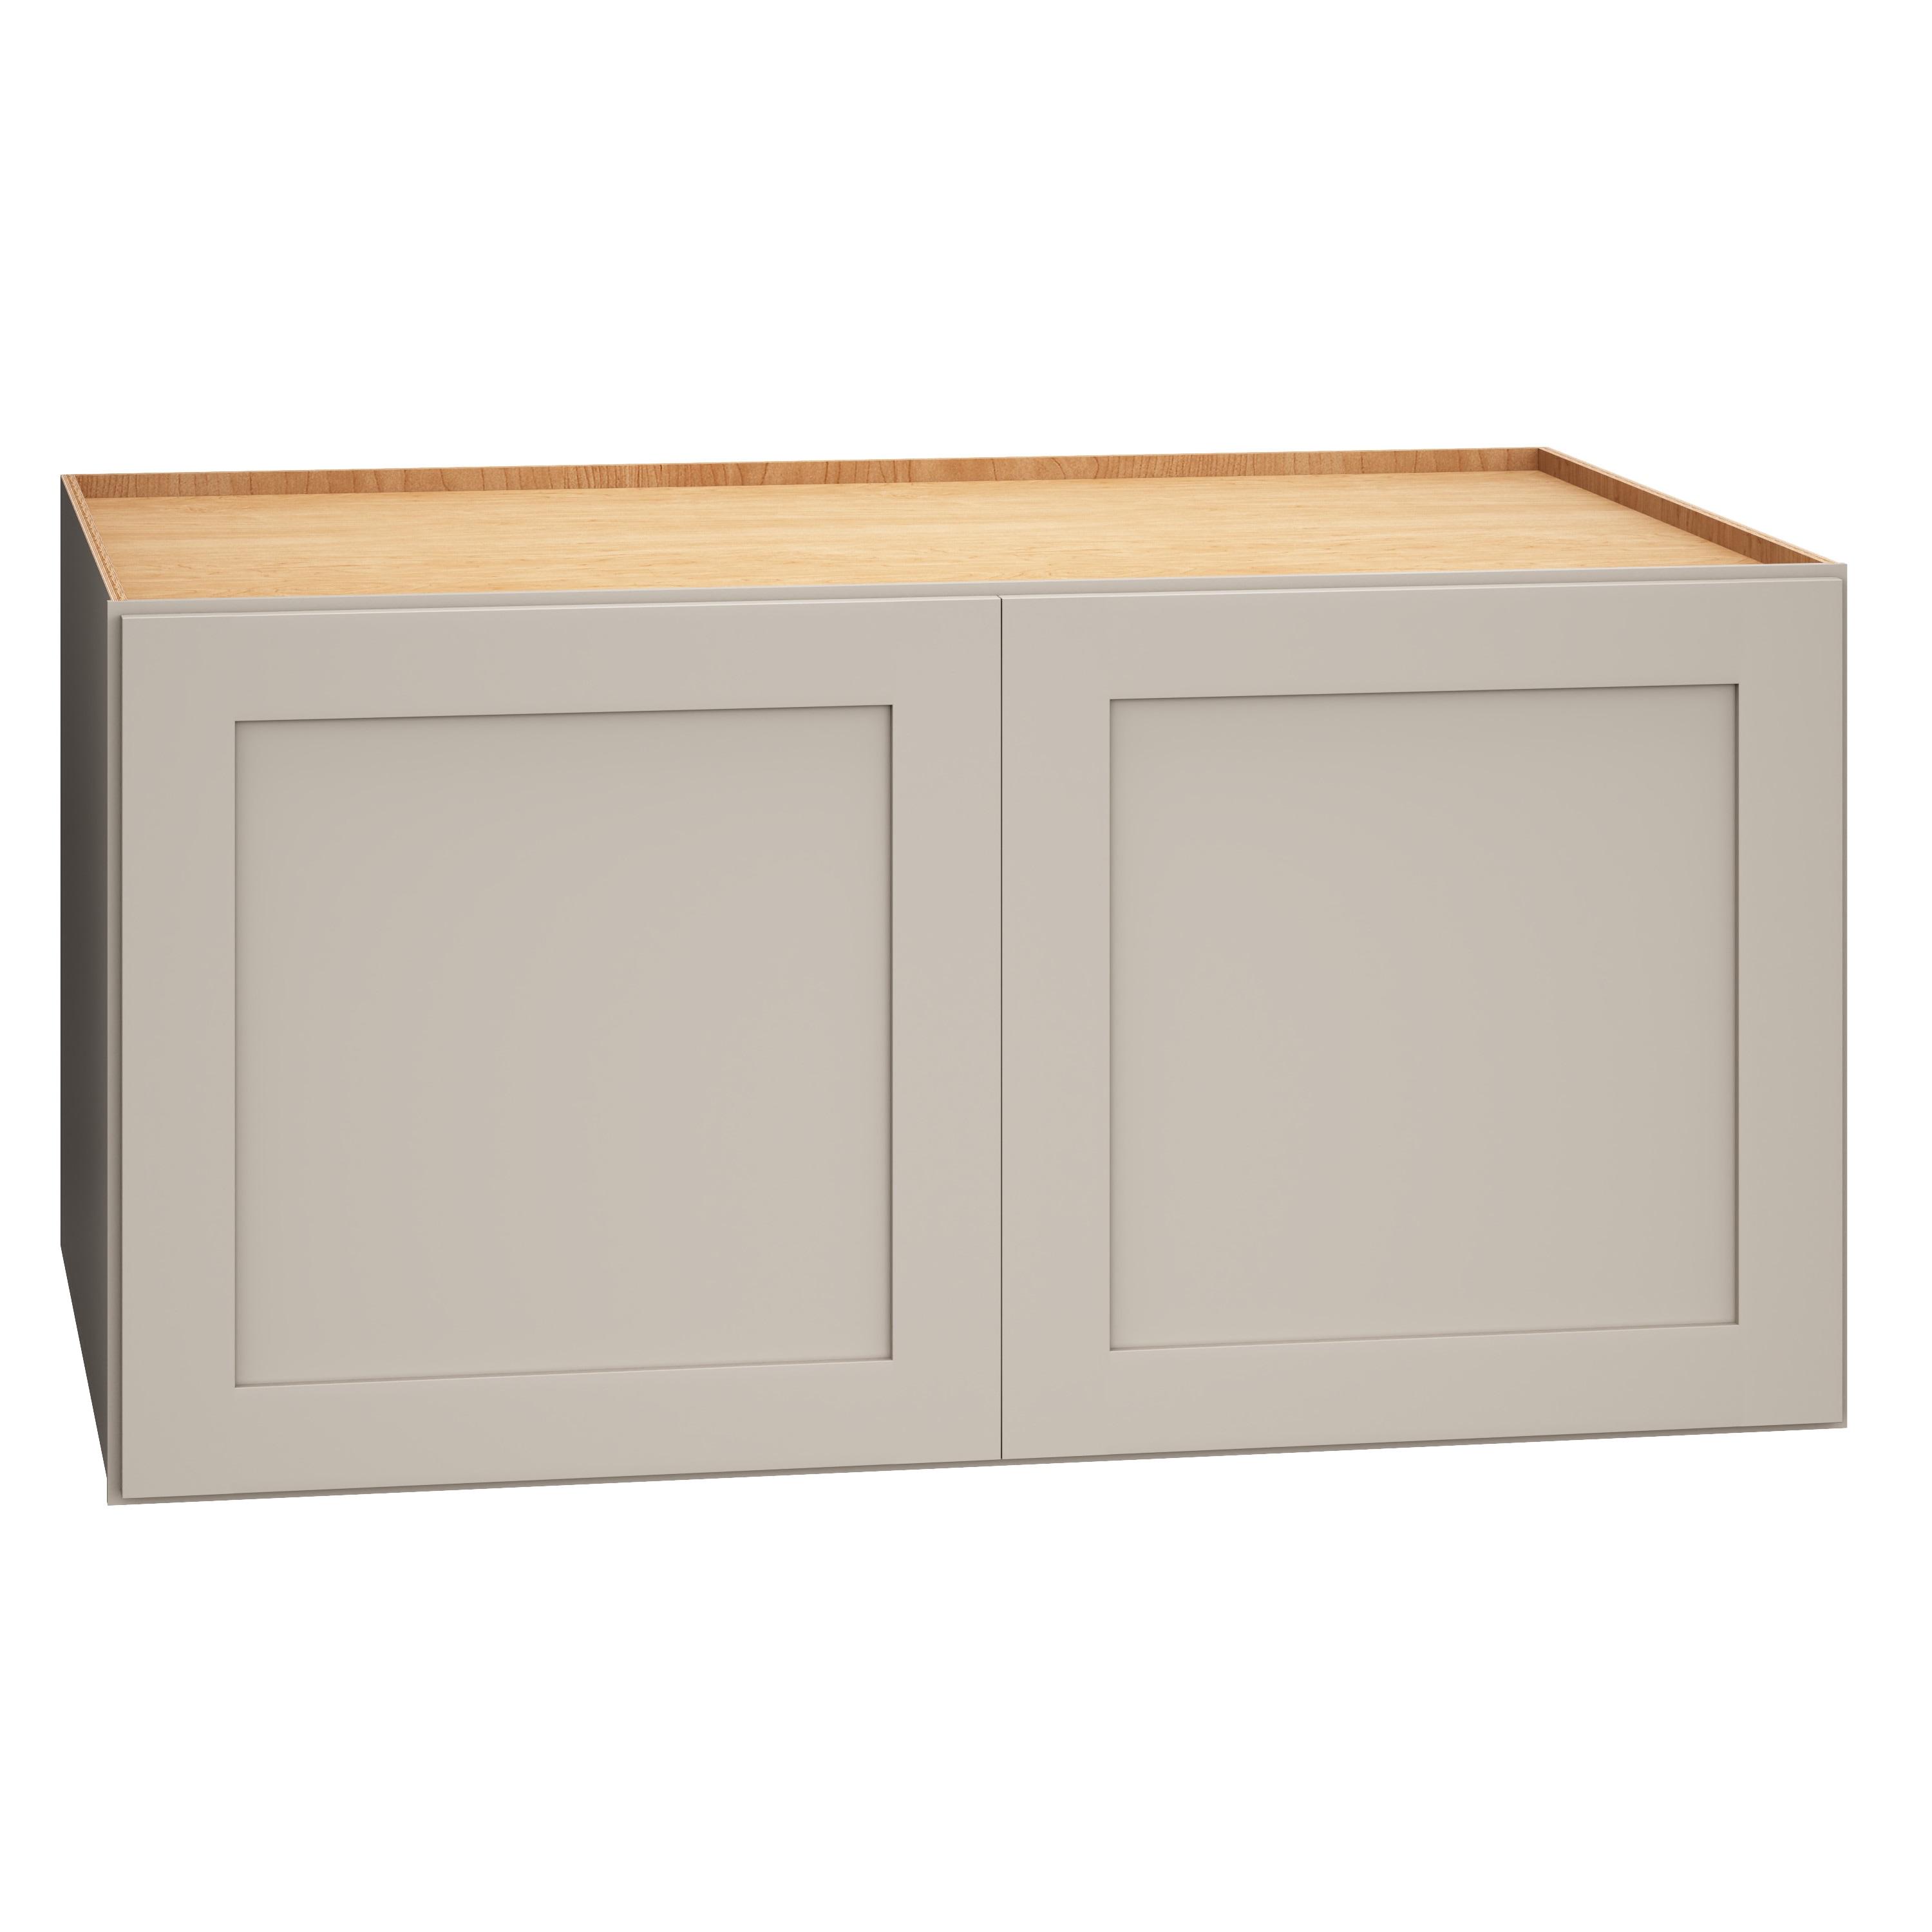 Diamond at Lowes - Organization - Wall Spice Pull-Out